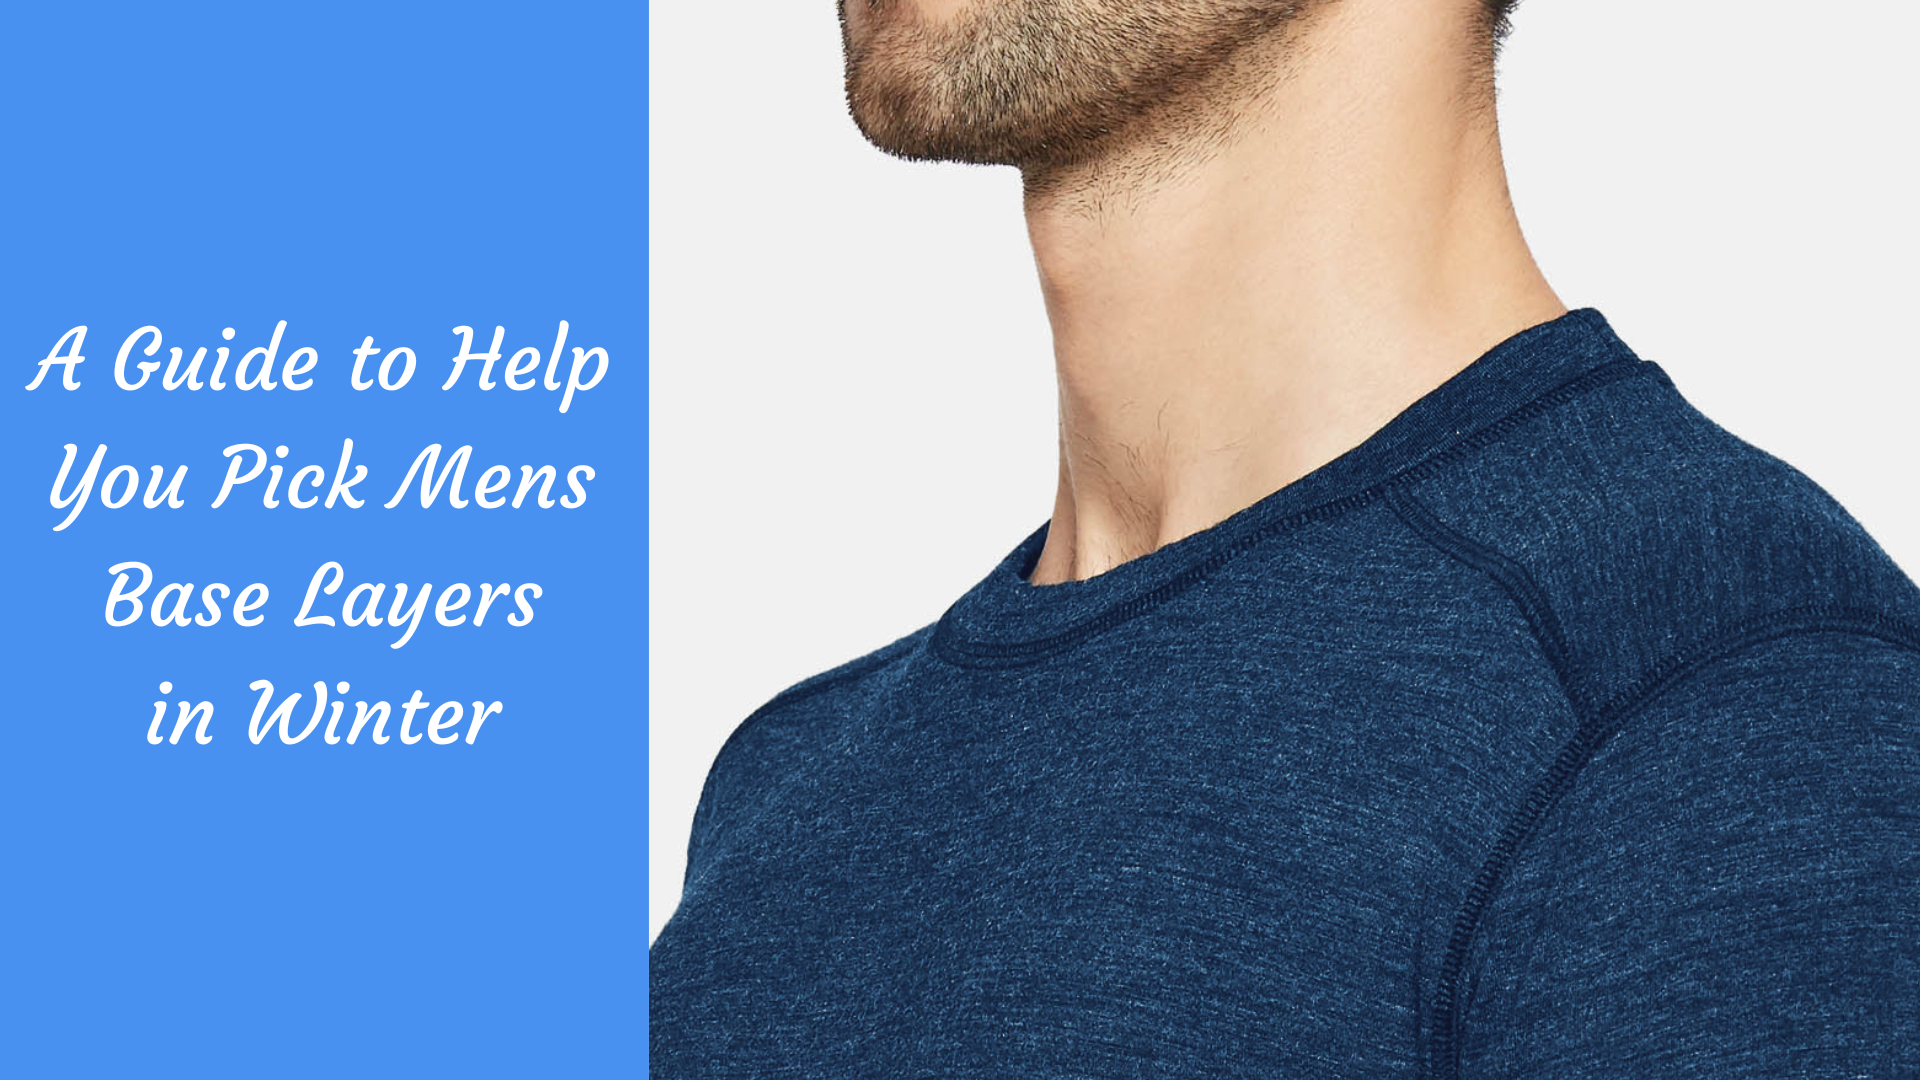 A Guide to Help You Pick Men's Base Layers in Winter - The Kosha